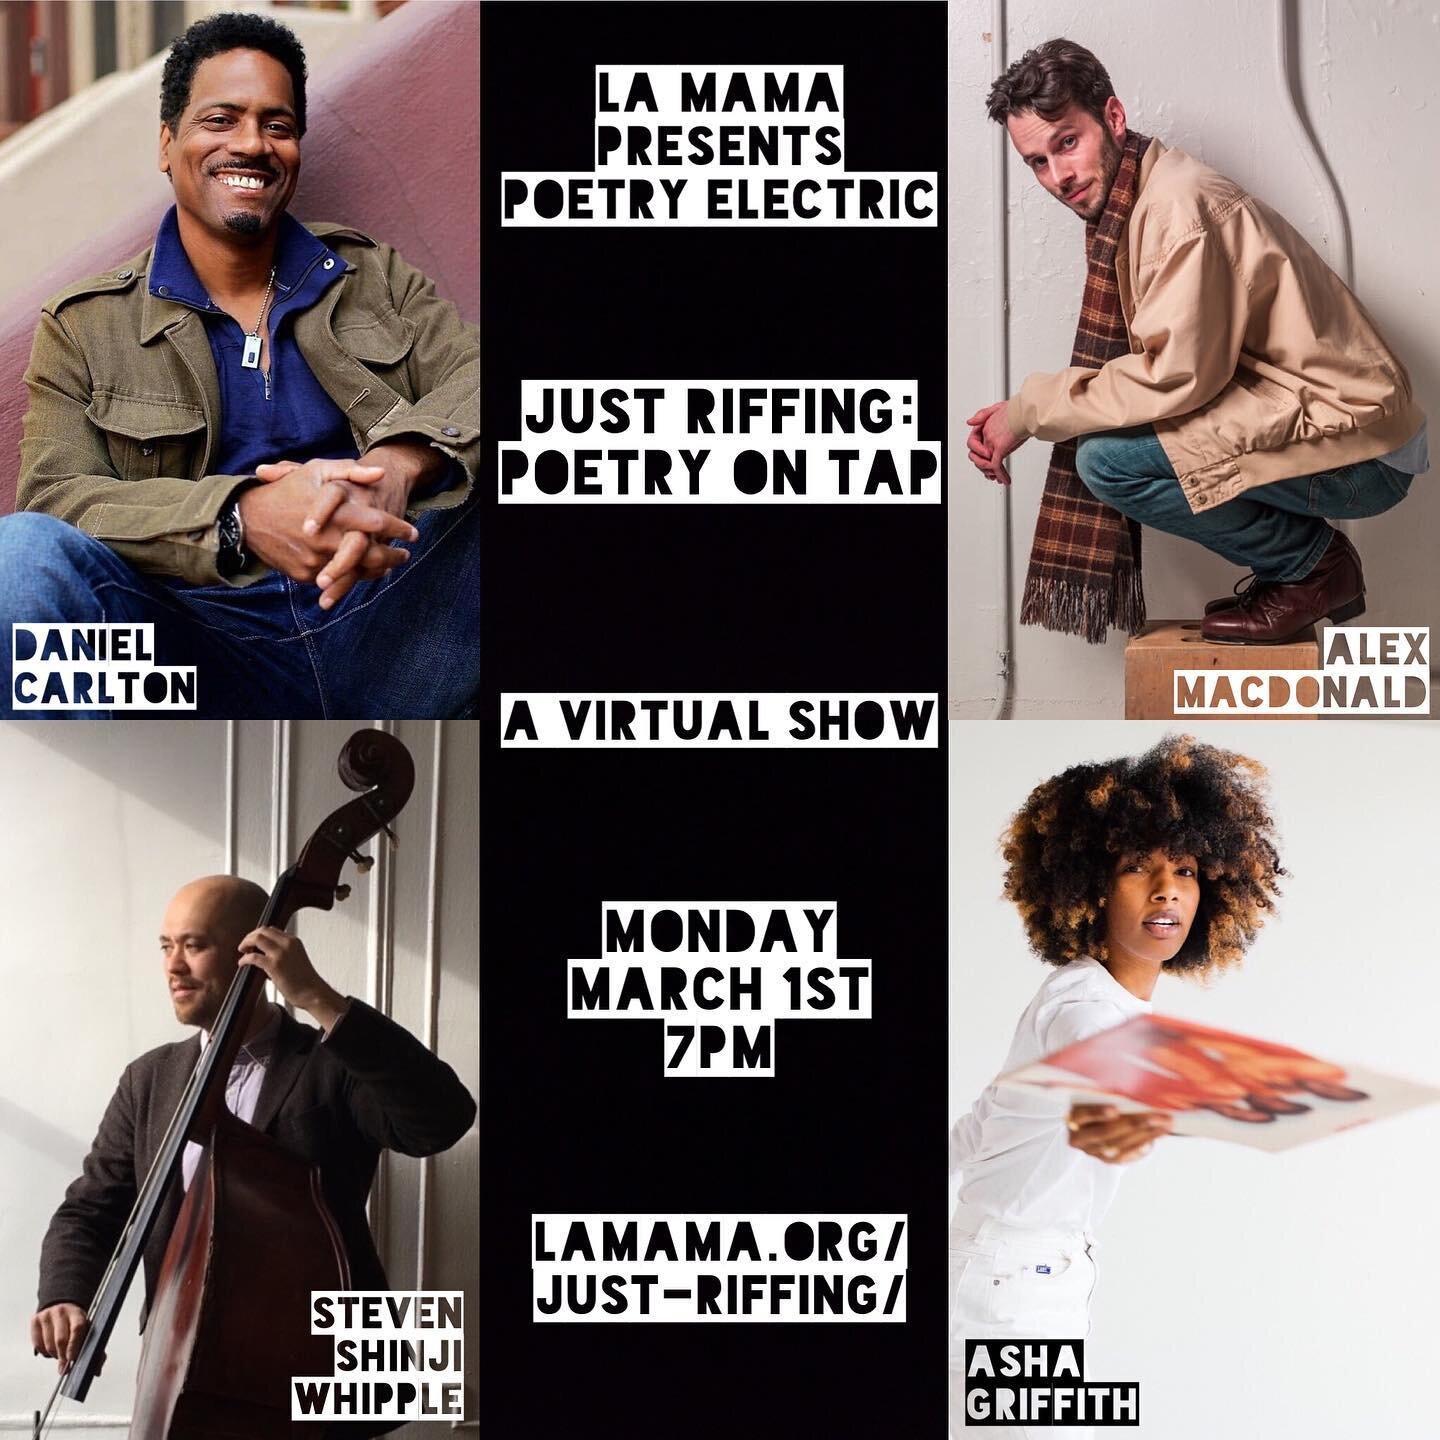 Doing a thing for @lamamaetc tonight on Zoom with the great @imdanielcarlton @jumpsuitalex and Asha Griffith. Poetry meets tap dance meets jazz. Check it out, it&rsquo;s free from their website!